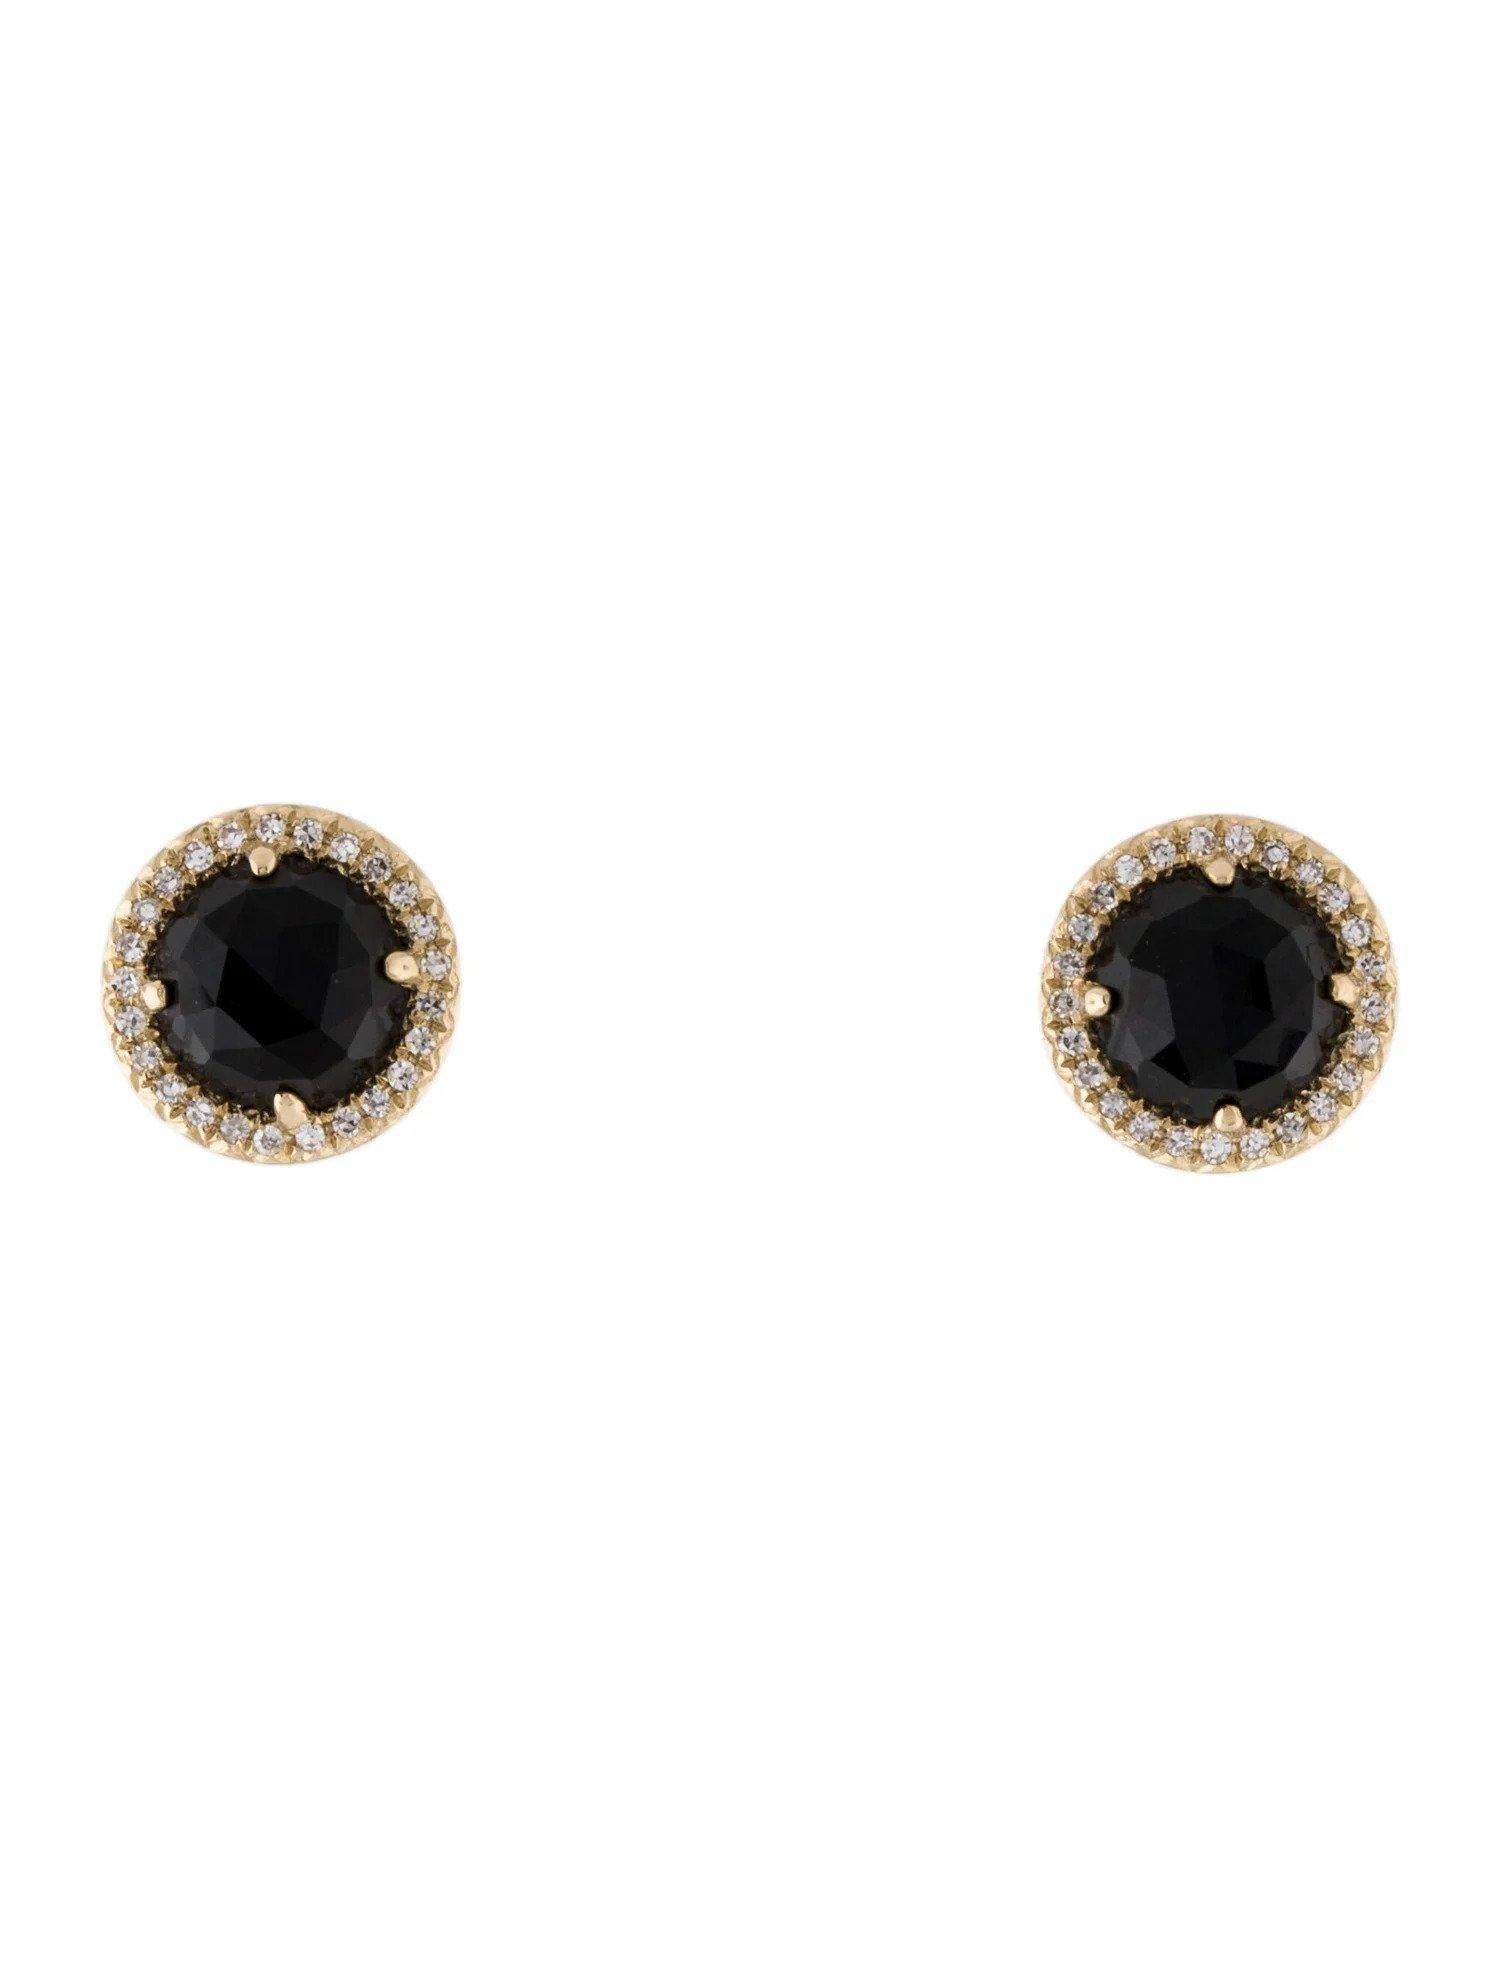 These Black Onyx & Diamond Earrings are a stunning and timeless accessory that can add a touch of glamour and sophistication to any outfit. 

These earrings each feature a 0.94 Carat Round Black Onyx, with a Diamond Halo comprised of 0.06 Carats of